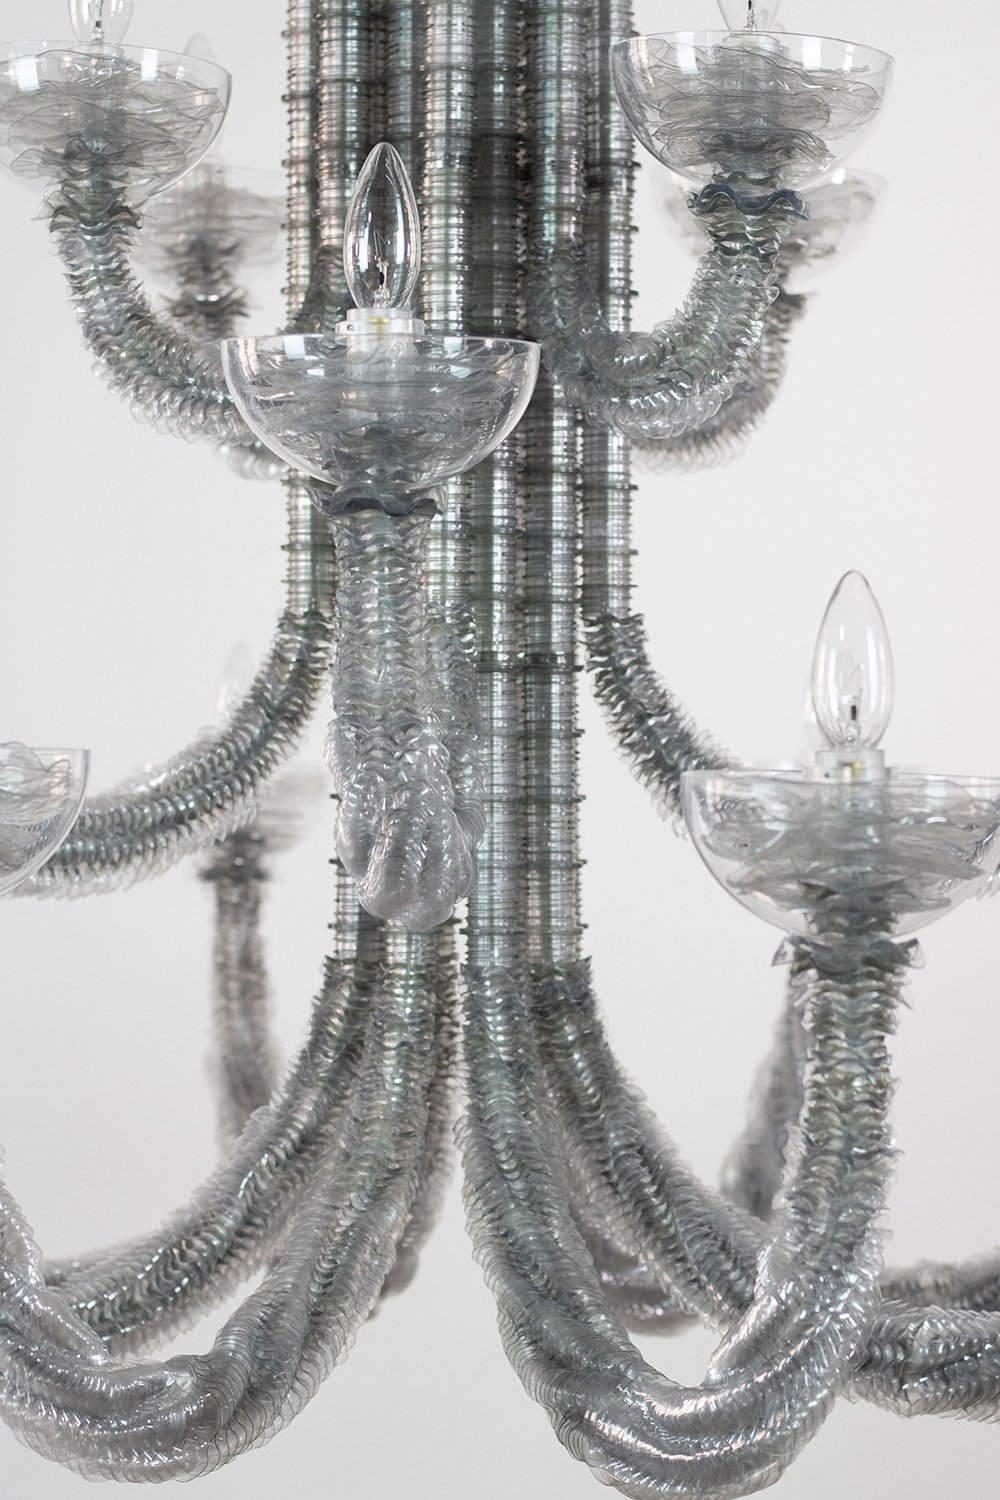 chandelier-thierry-jeannot-photography-yvan-robledo-©thierryjeannot©marionfriedmanngallery-STR-0396-lr.jpg